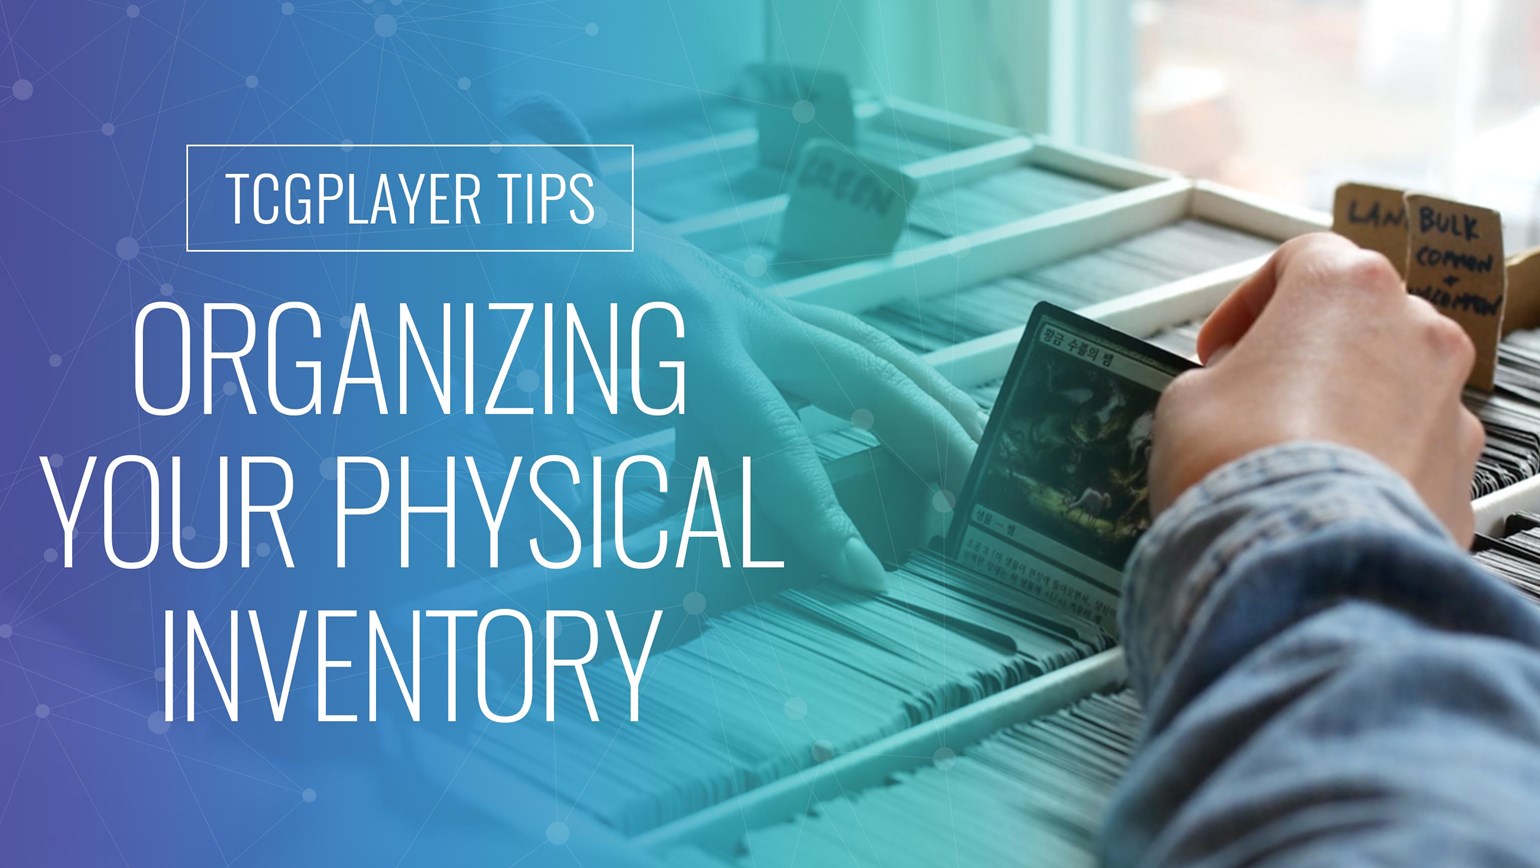 TCGplayer Tips: Organizing Your Physical Inventory